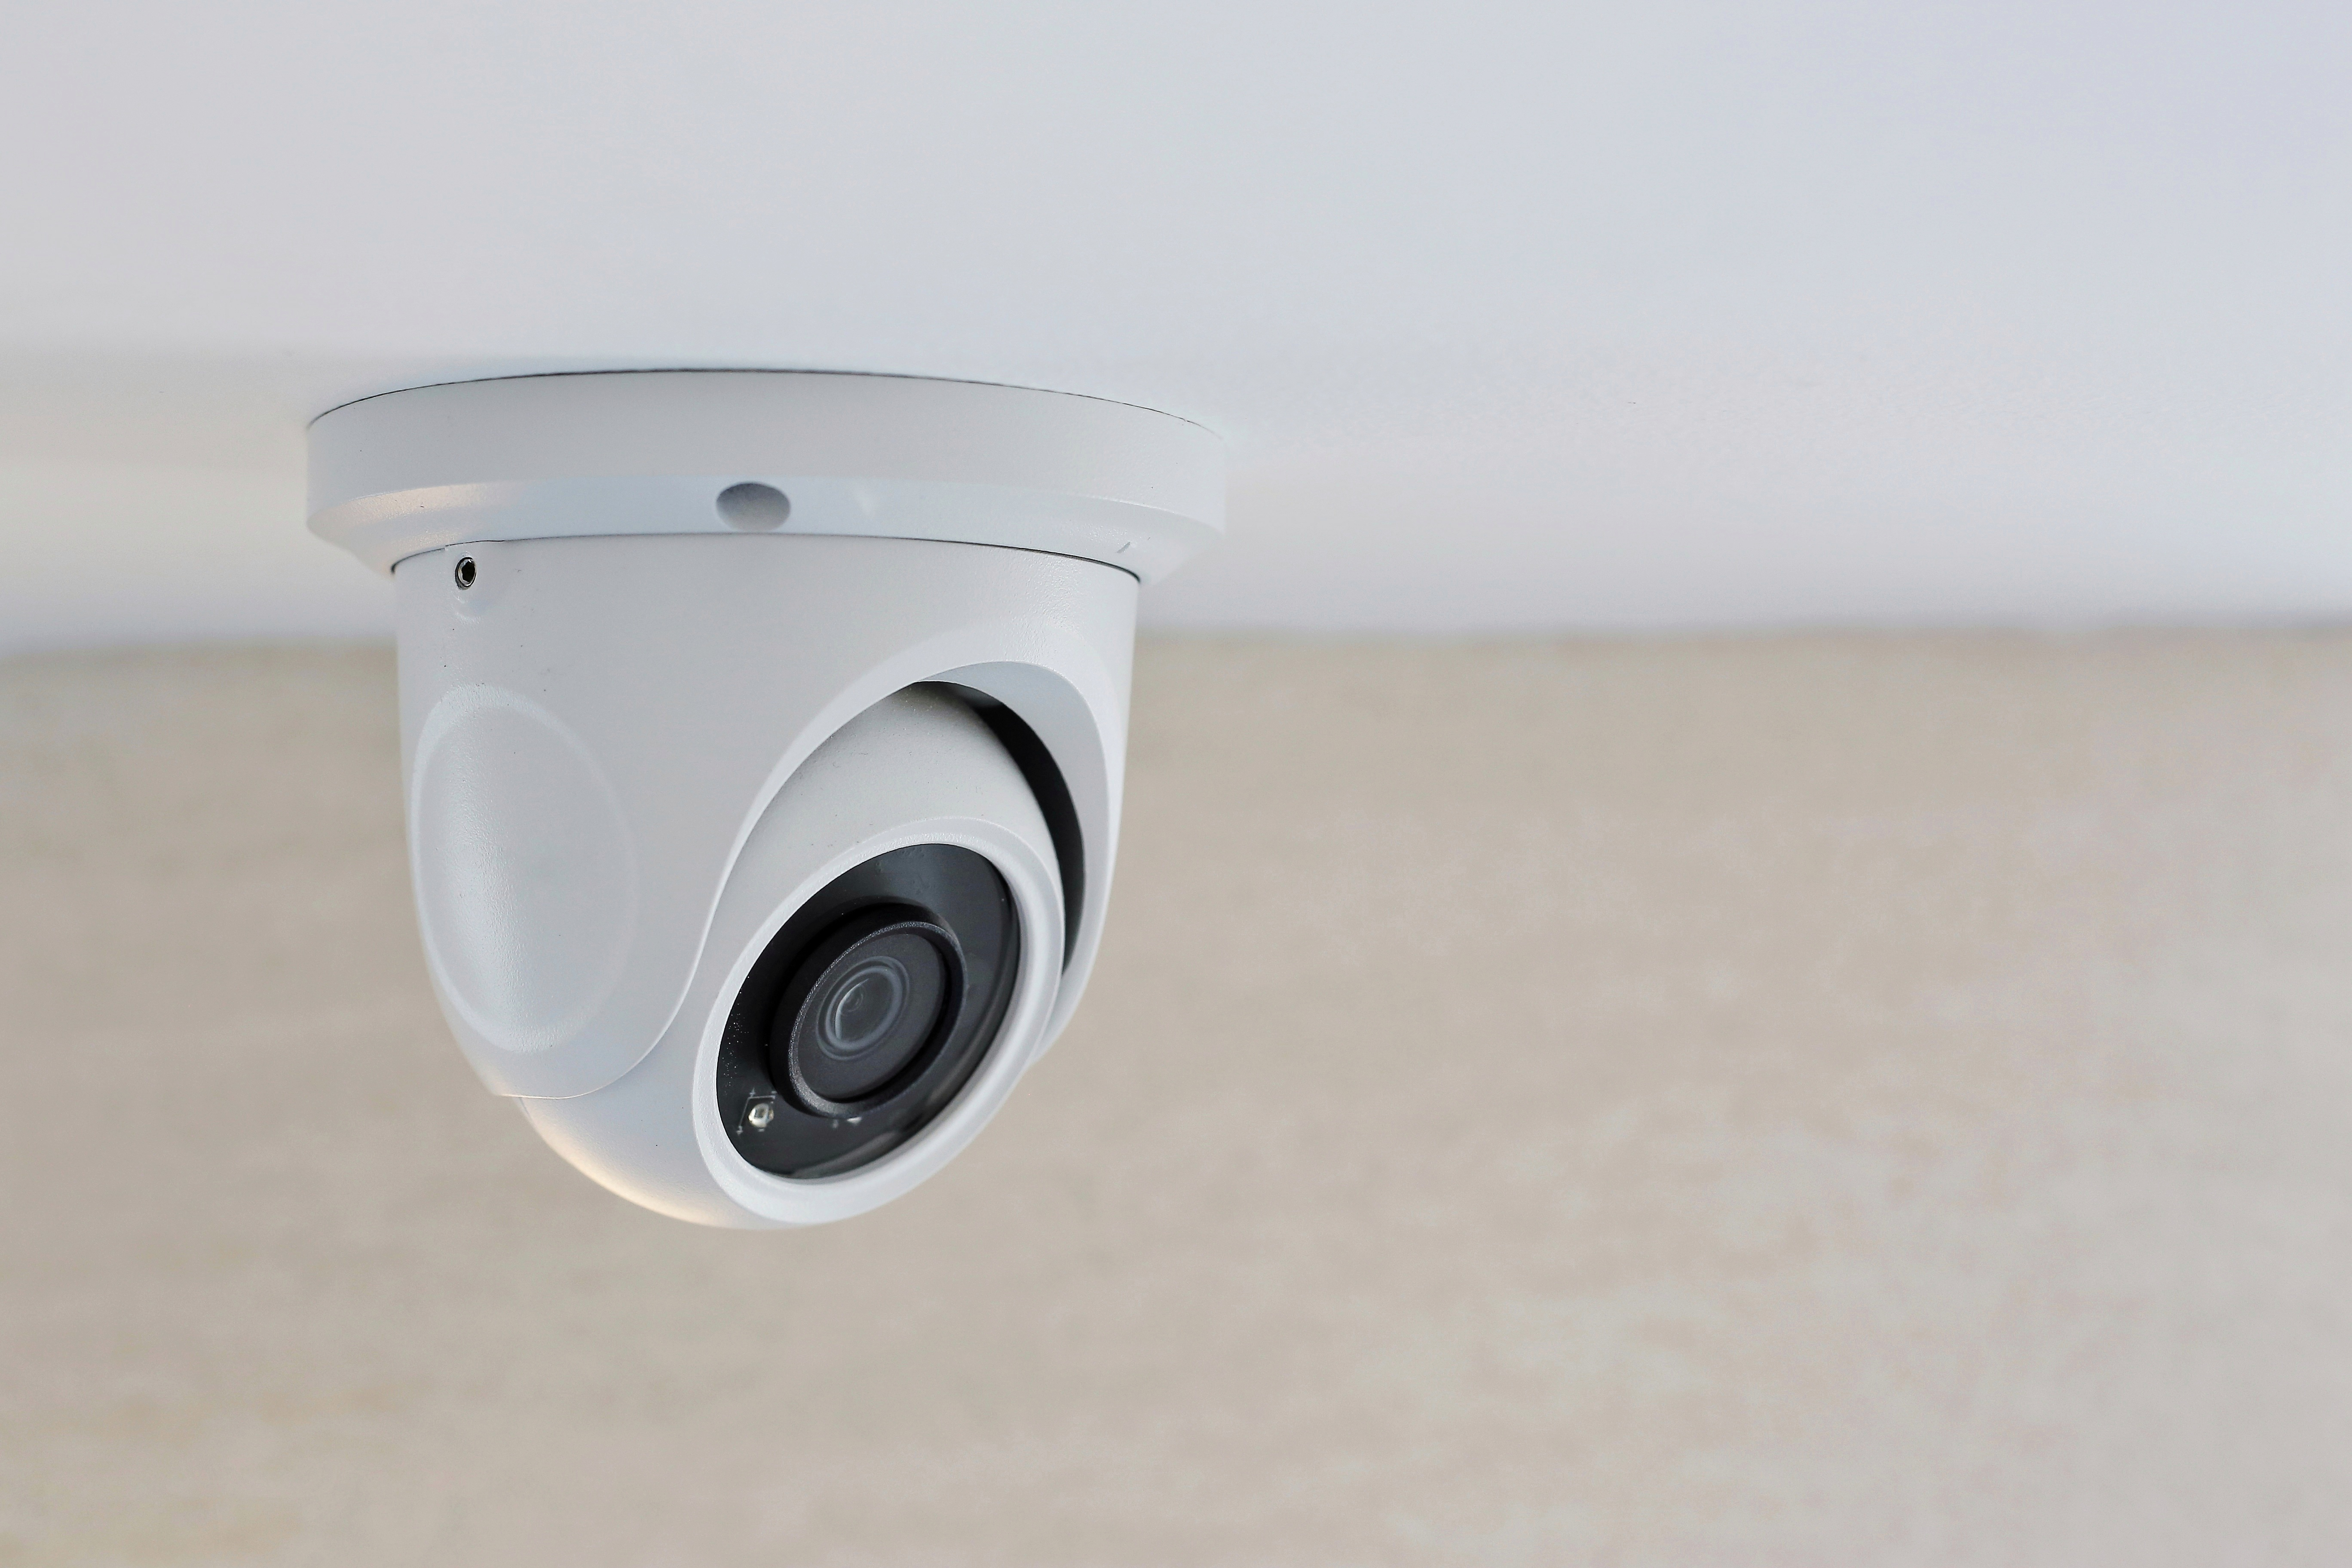 A CCTV camera on a ceiling | Source: Shutterstock